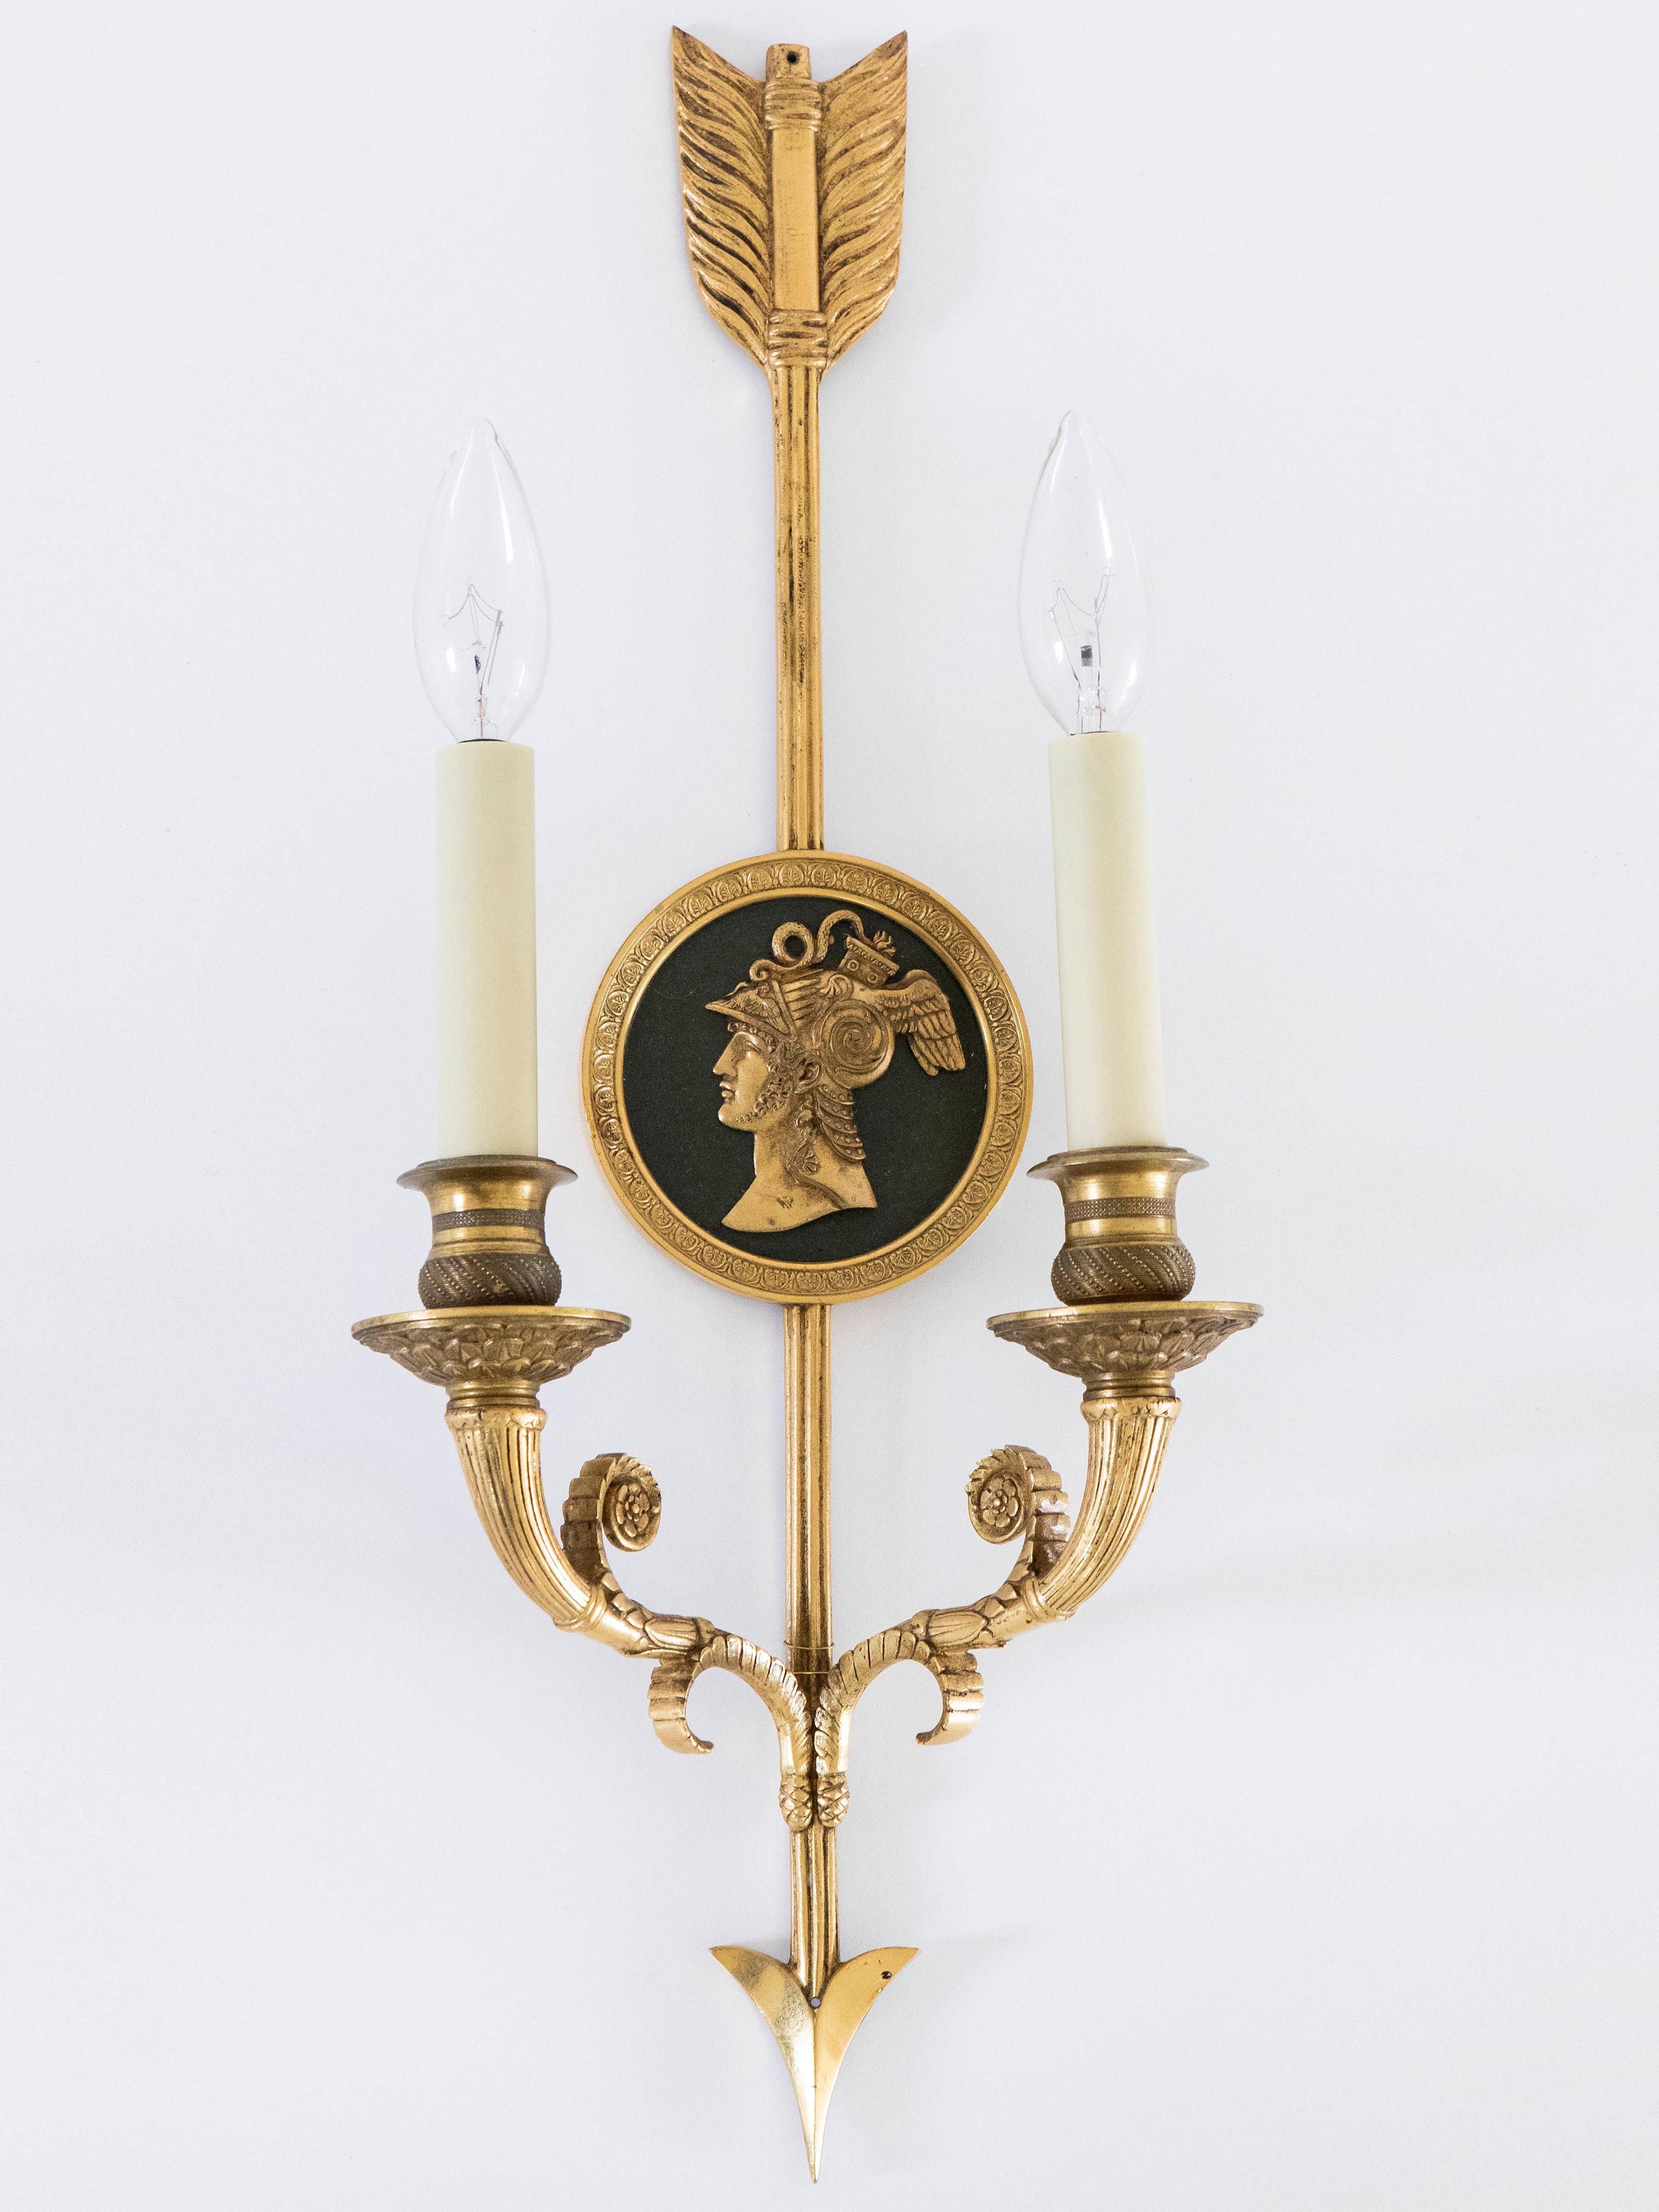 Pair of French Empire gilded bronze arrow double light sconces with medallion motif. Wired for USA, 2 sockets per lamp, 40W max per socket. New black linen shades are 4